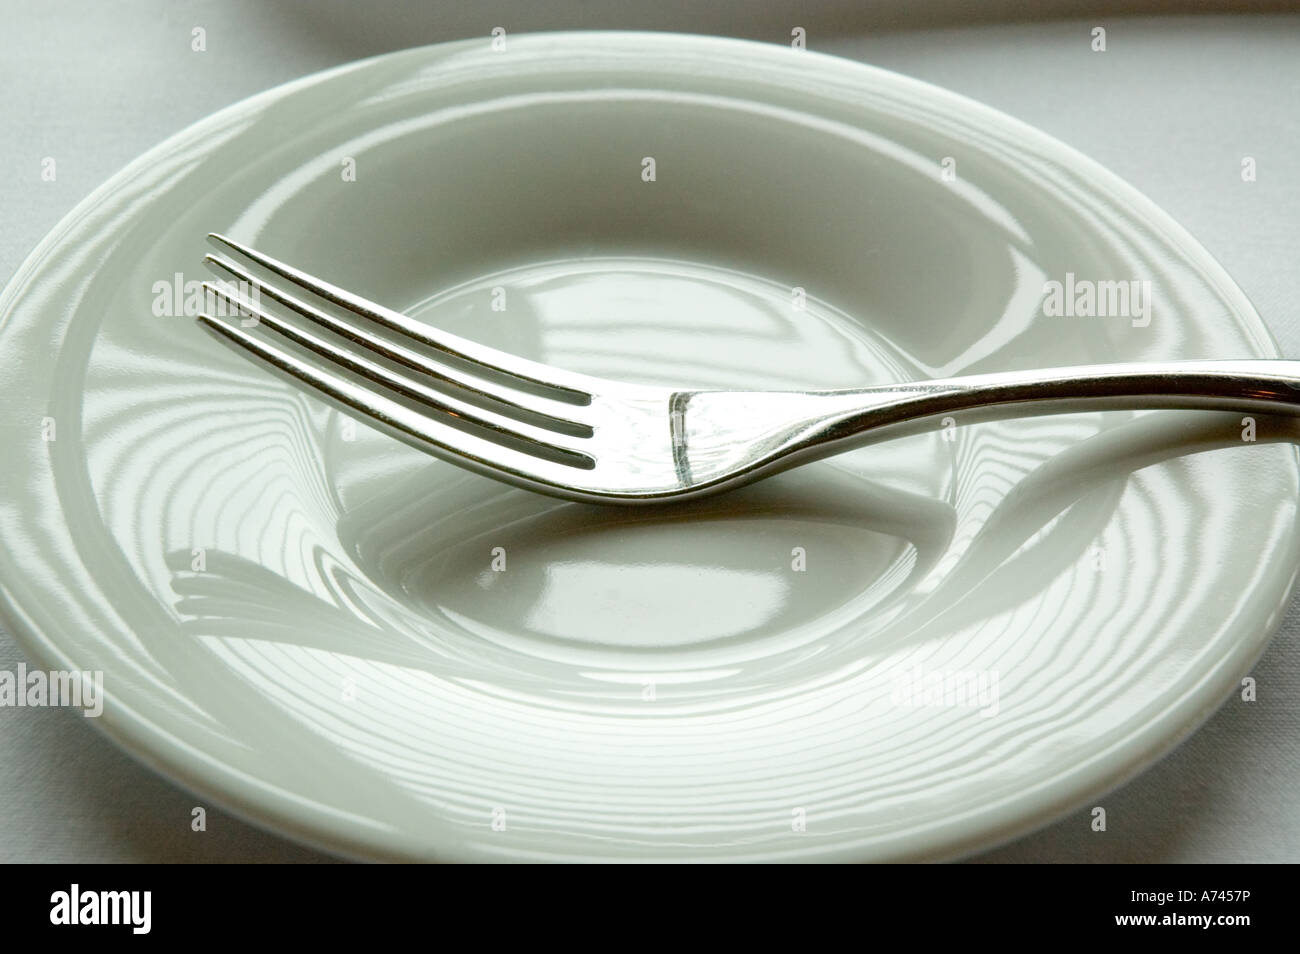 Silver fork on a side plate Stock Photo